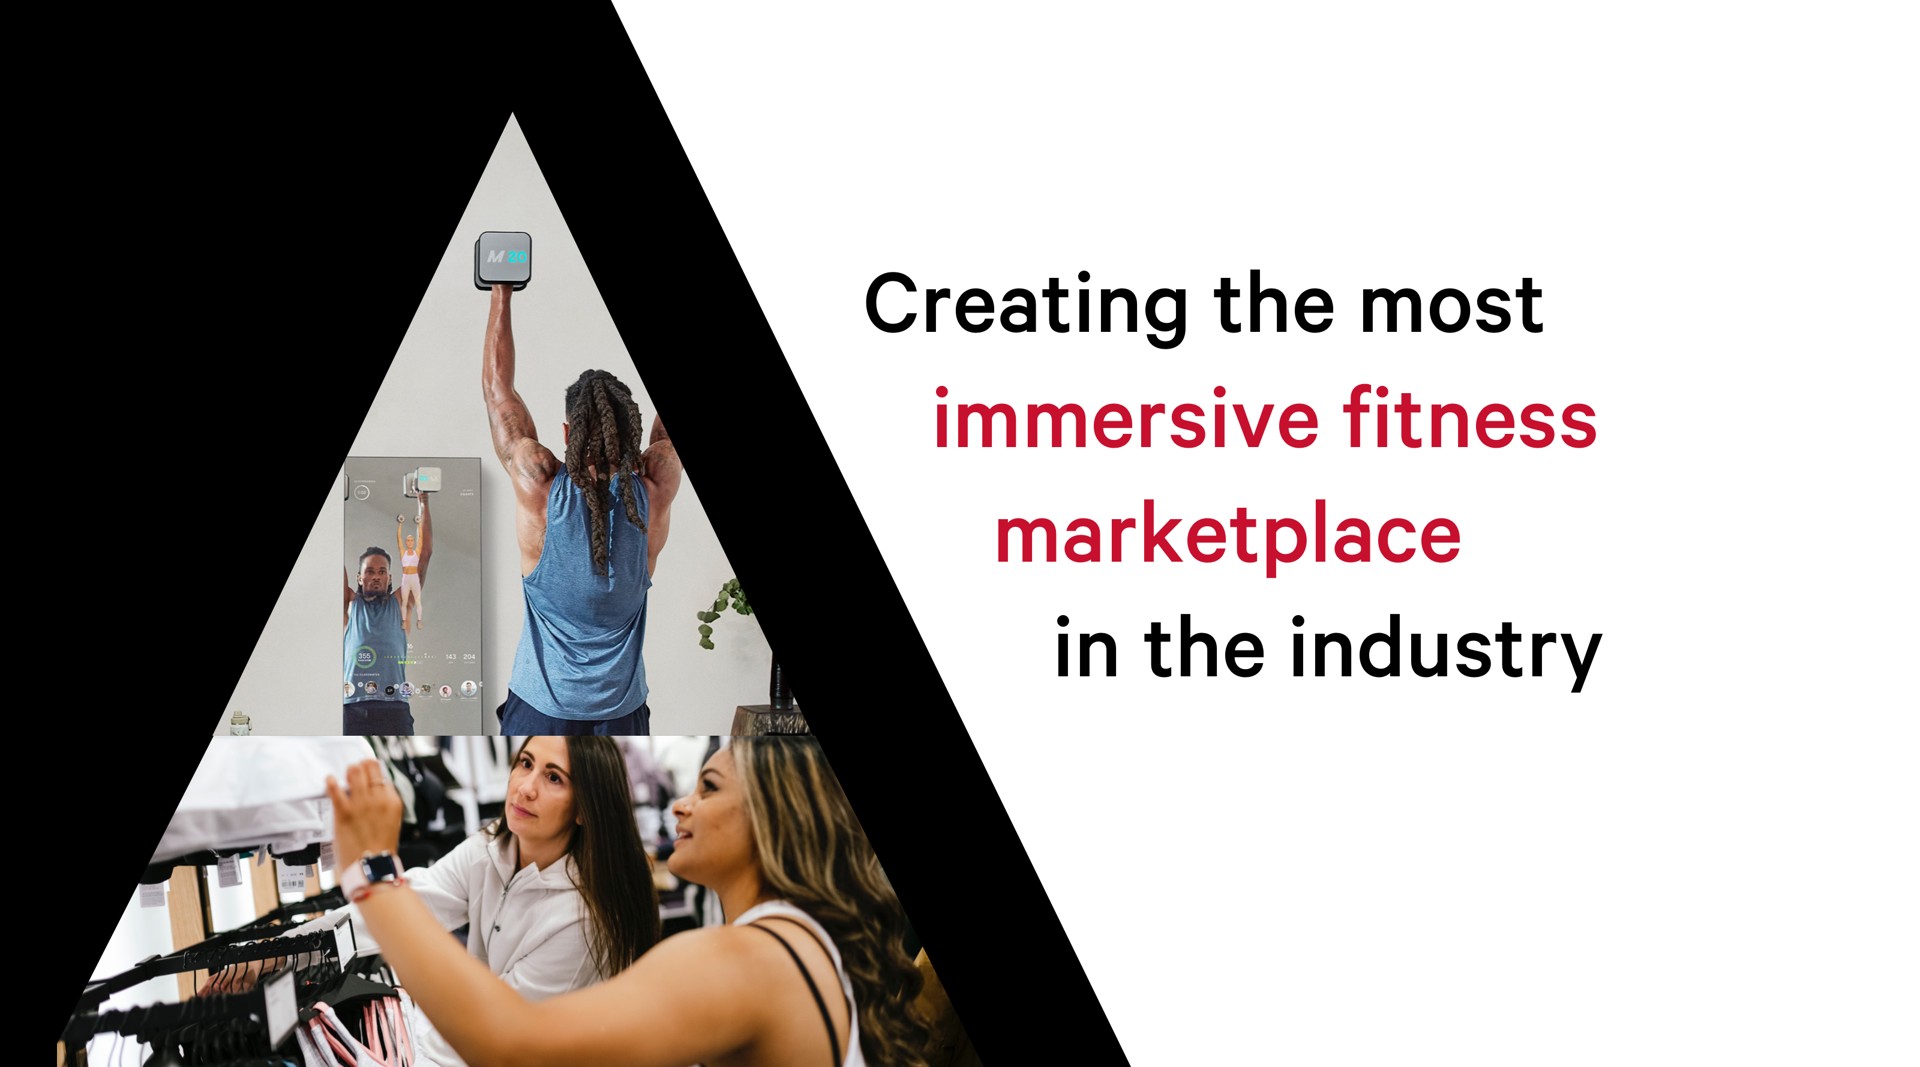 imagining the future of membership pinnacle creating the most immersive fitness in the industry | Lululemon